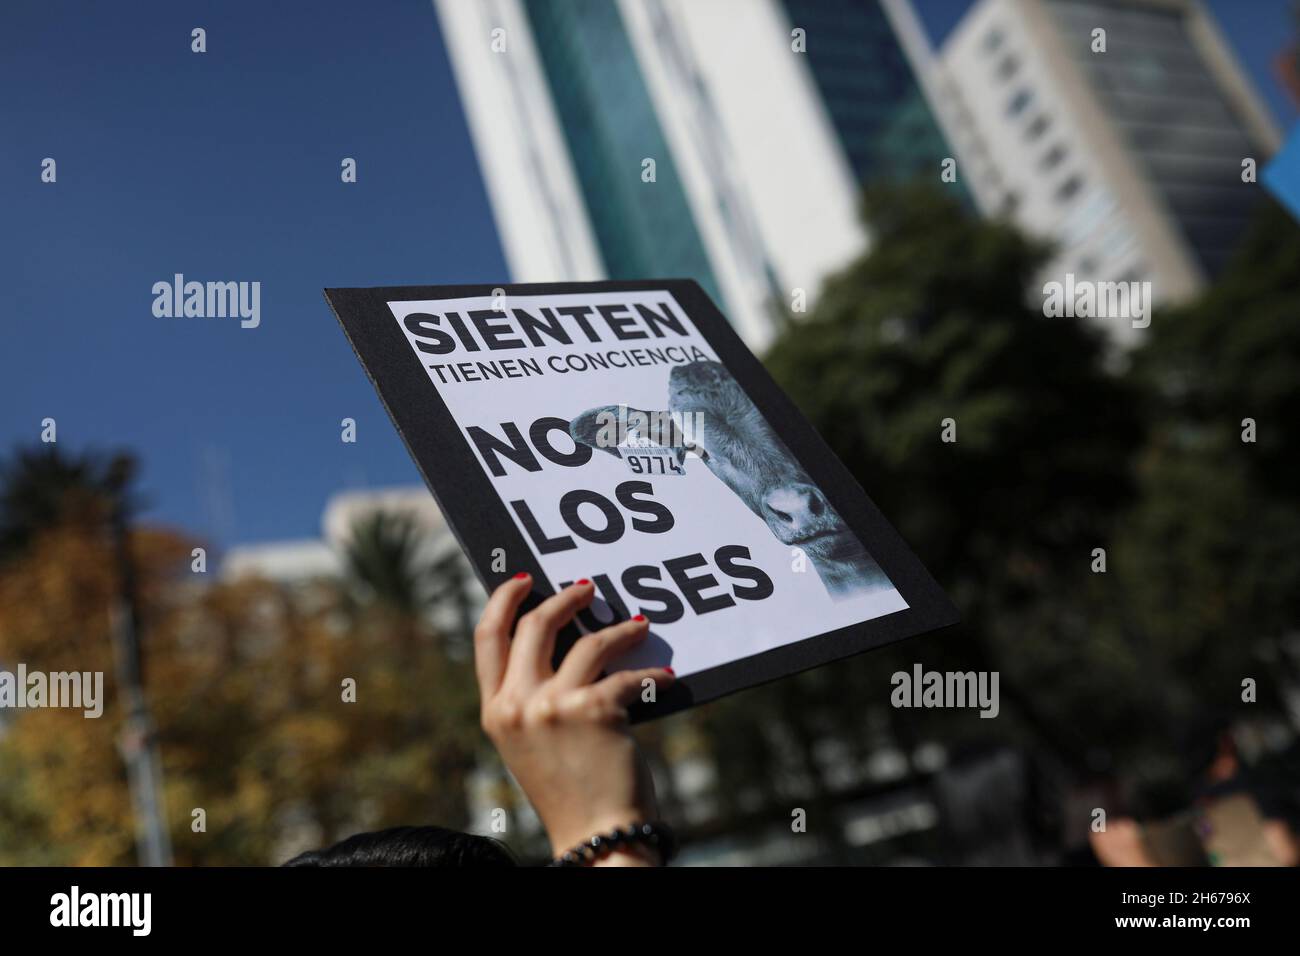 An animal rights activist holds a sign that read, 'They feel. They have conscience. Don't use them' in a demonstration demanding justice against animal abuse in Mexico City, Mexico November 13, 2021. REUTERS/Edgard Garrido Stock Photo